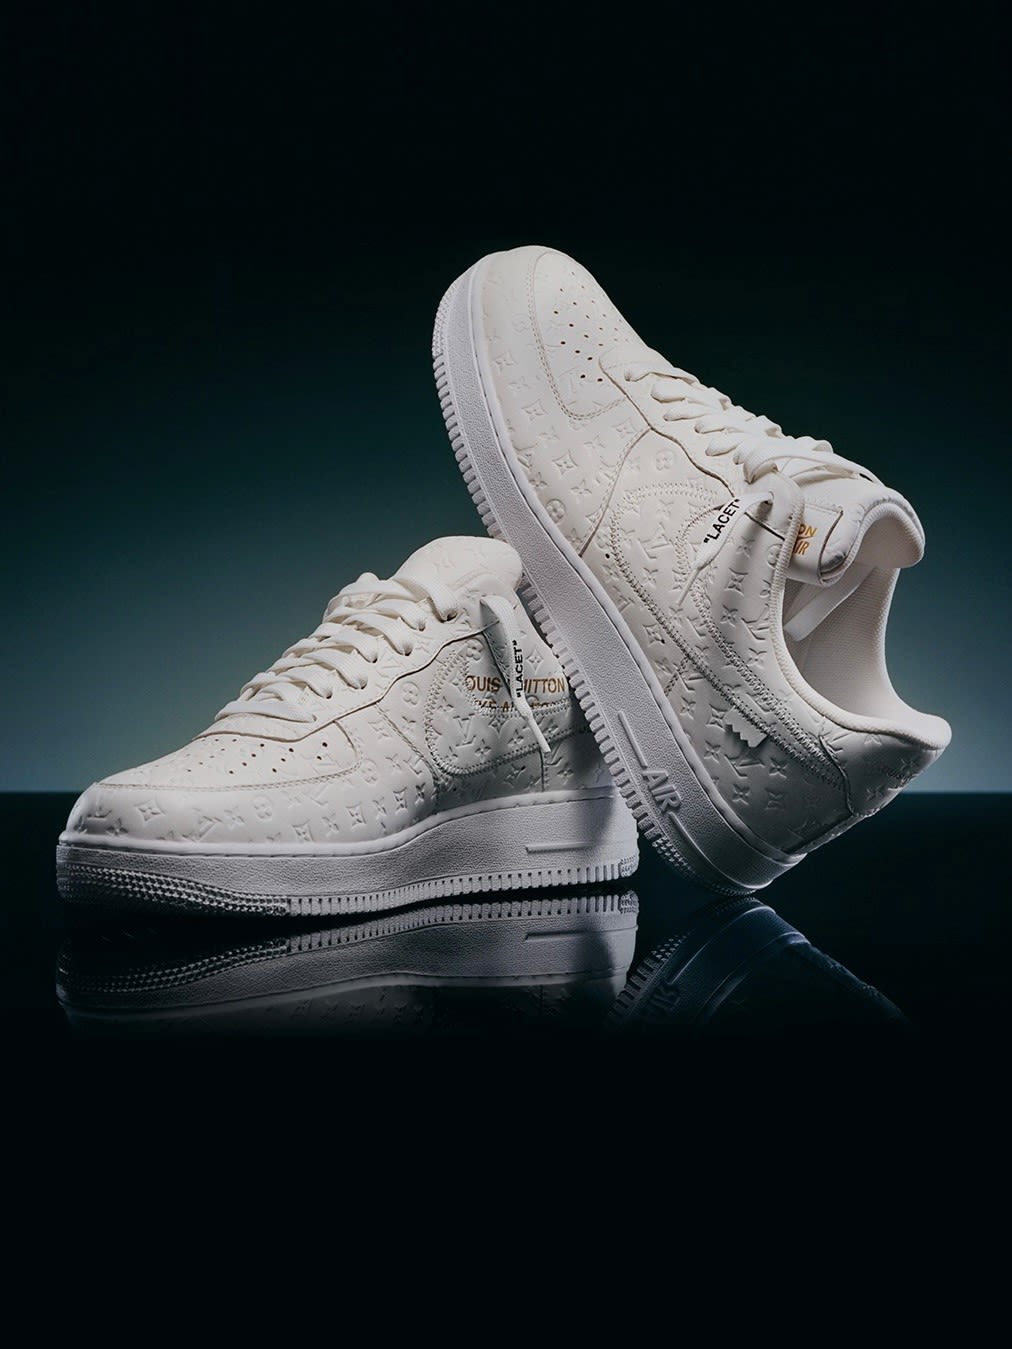 Sneakerheads, here's how to get your hands on the Louis Vuitton Nike Air  Force 1 sneakers - CNA Luxury